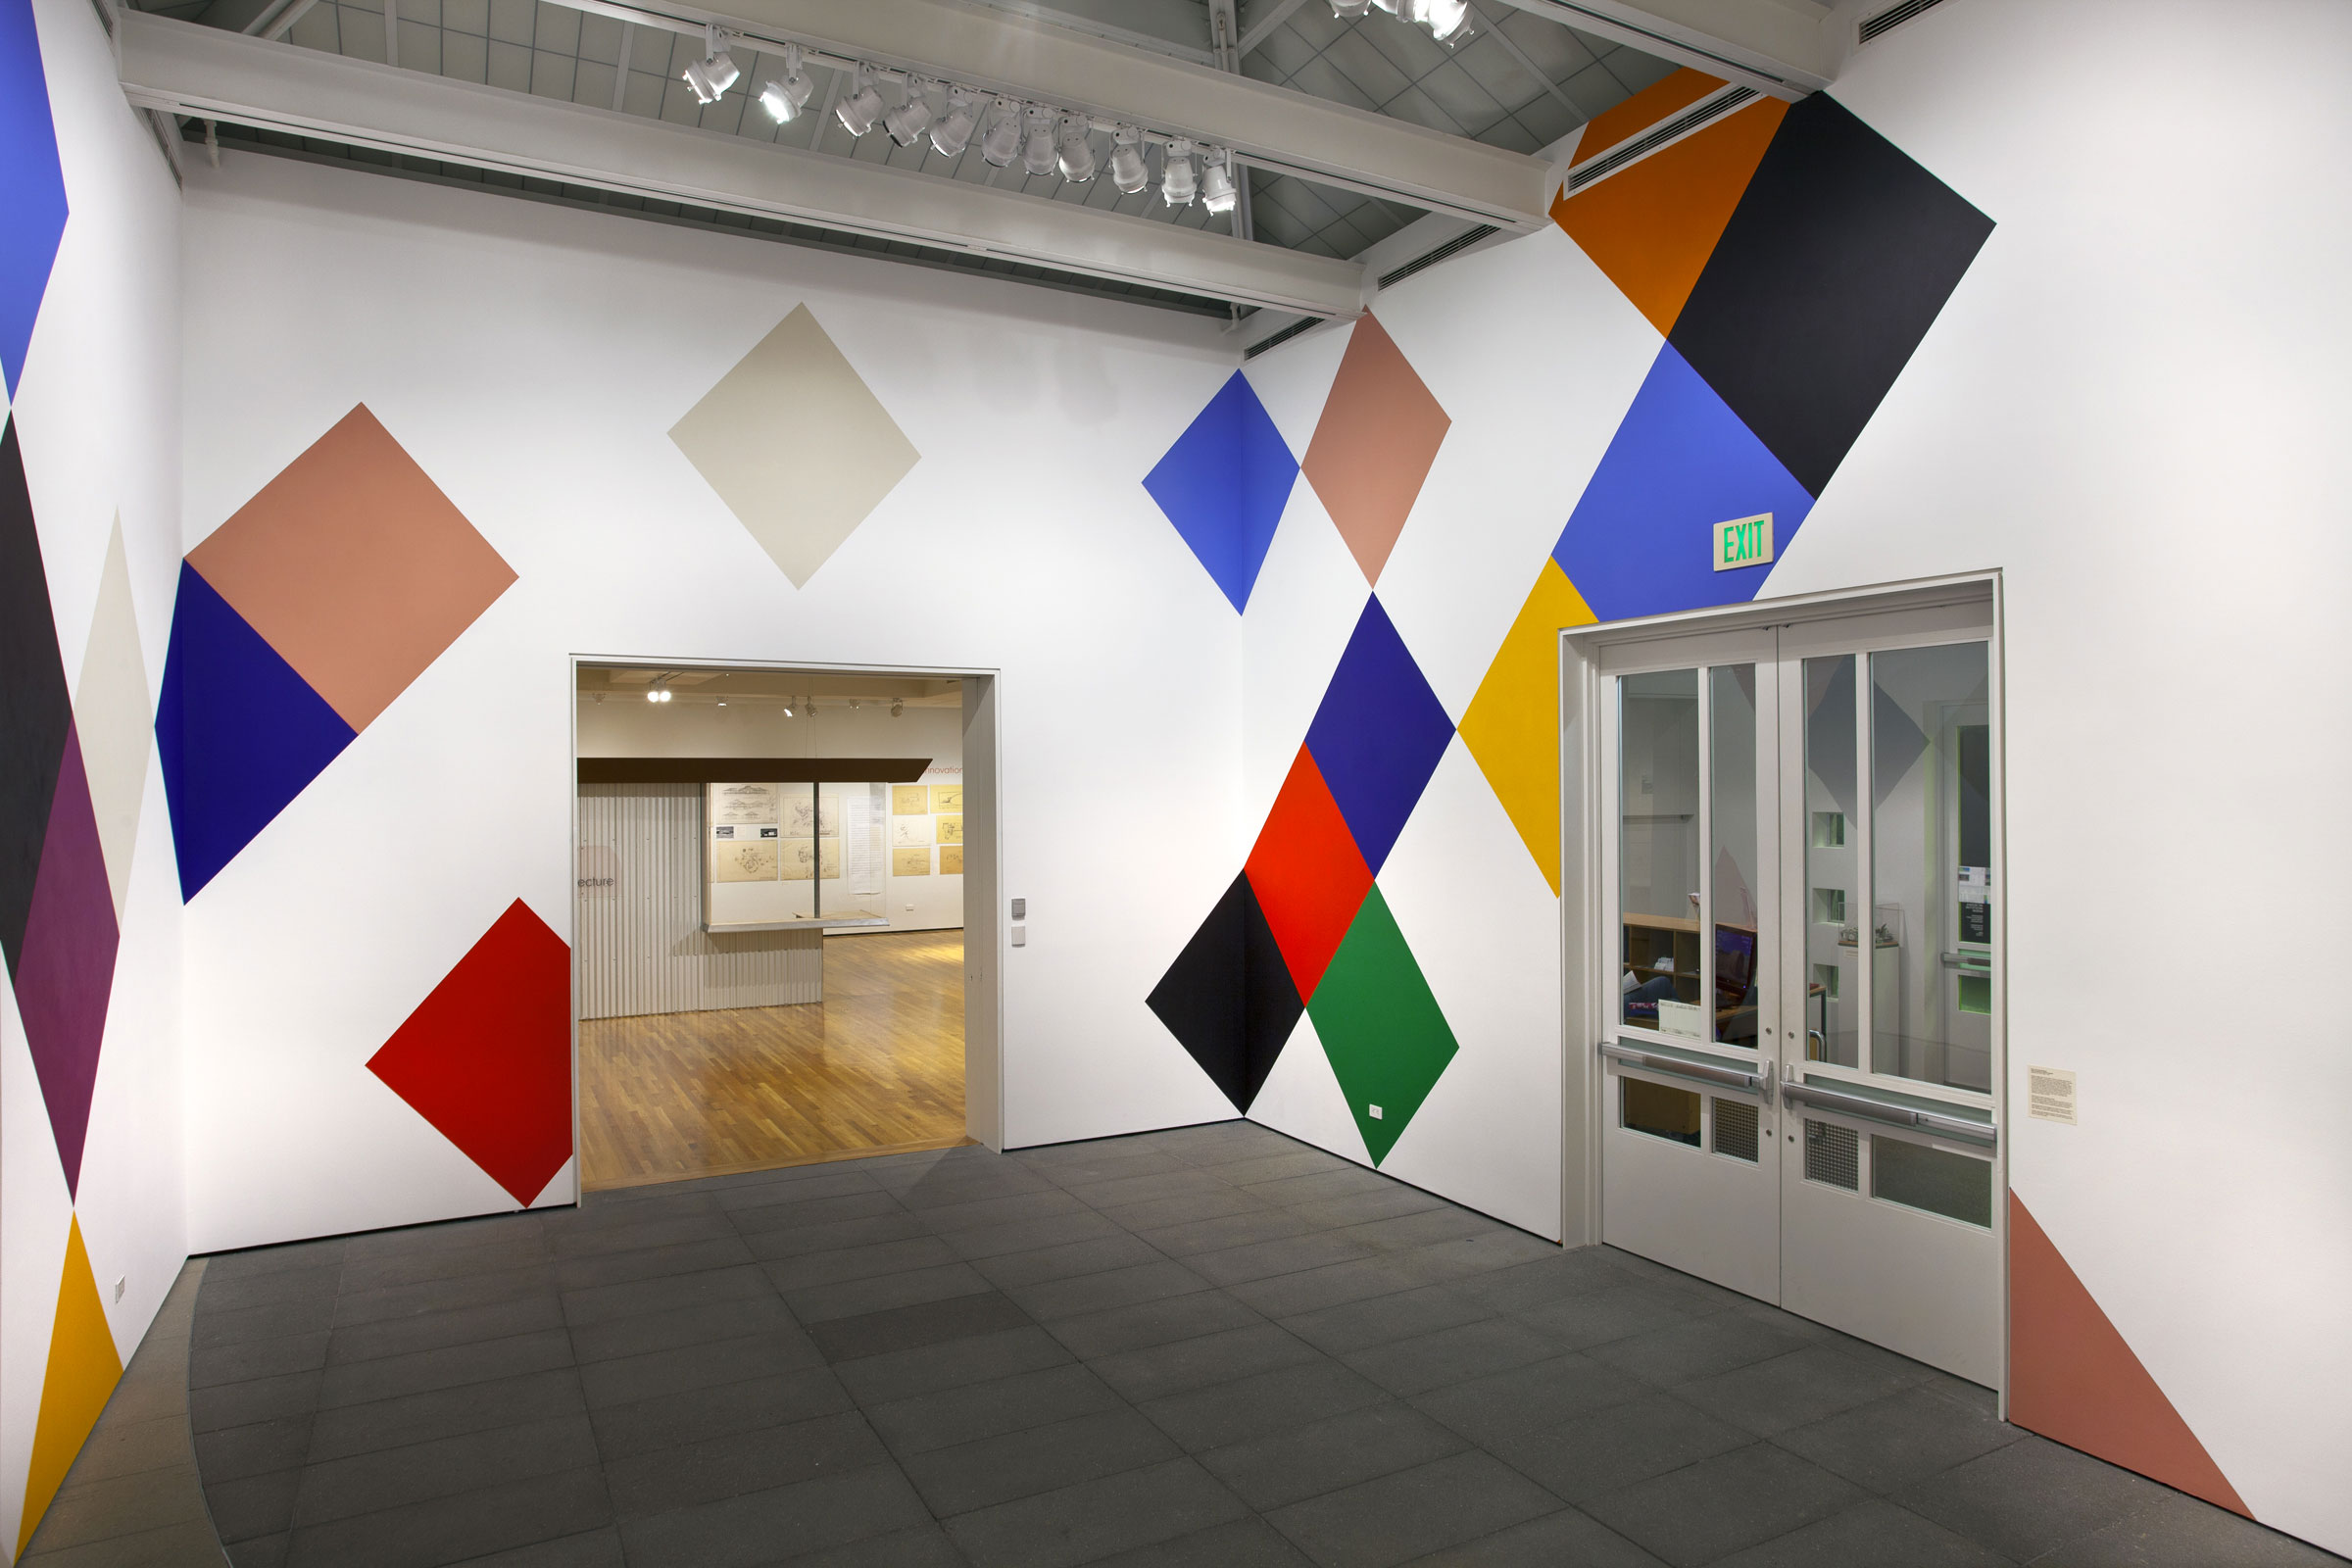   Stars and Candywrappers , 2015, 18’6” x 100’, wall painting installed on all four walls of the Nachman Gallery, Museum of Art, Design and Architecture,&nbsp;University of California Santa Barbara.&nbsp;On view September 25, 2015-May 1, 2016. 